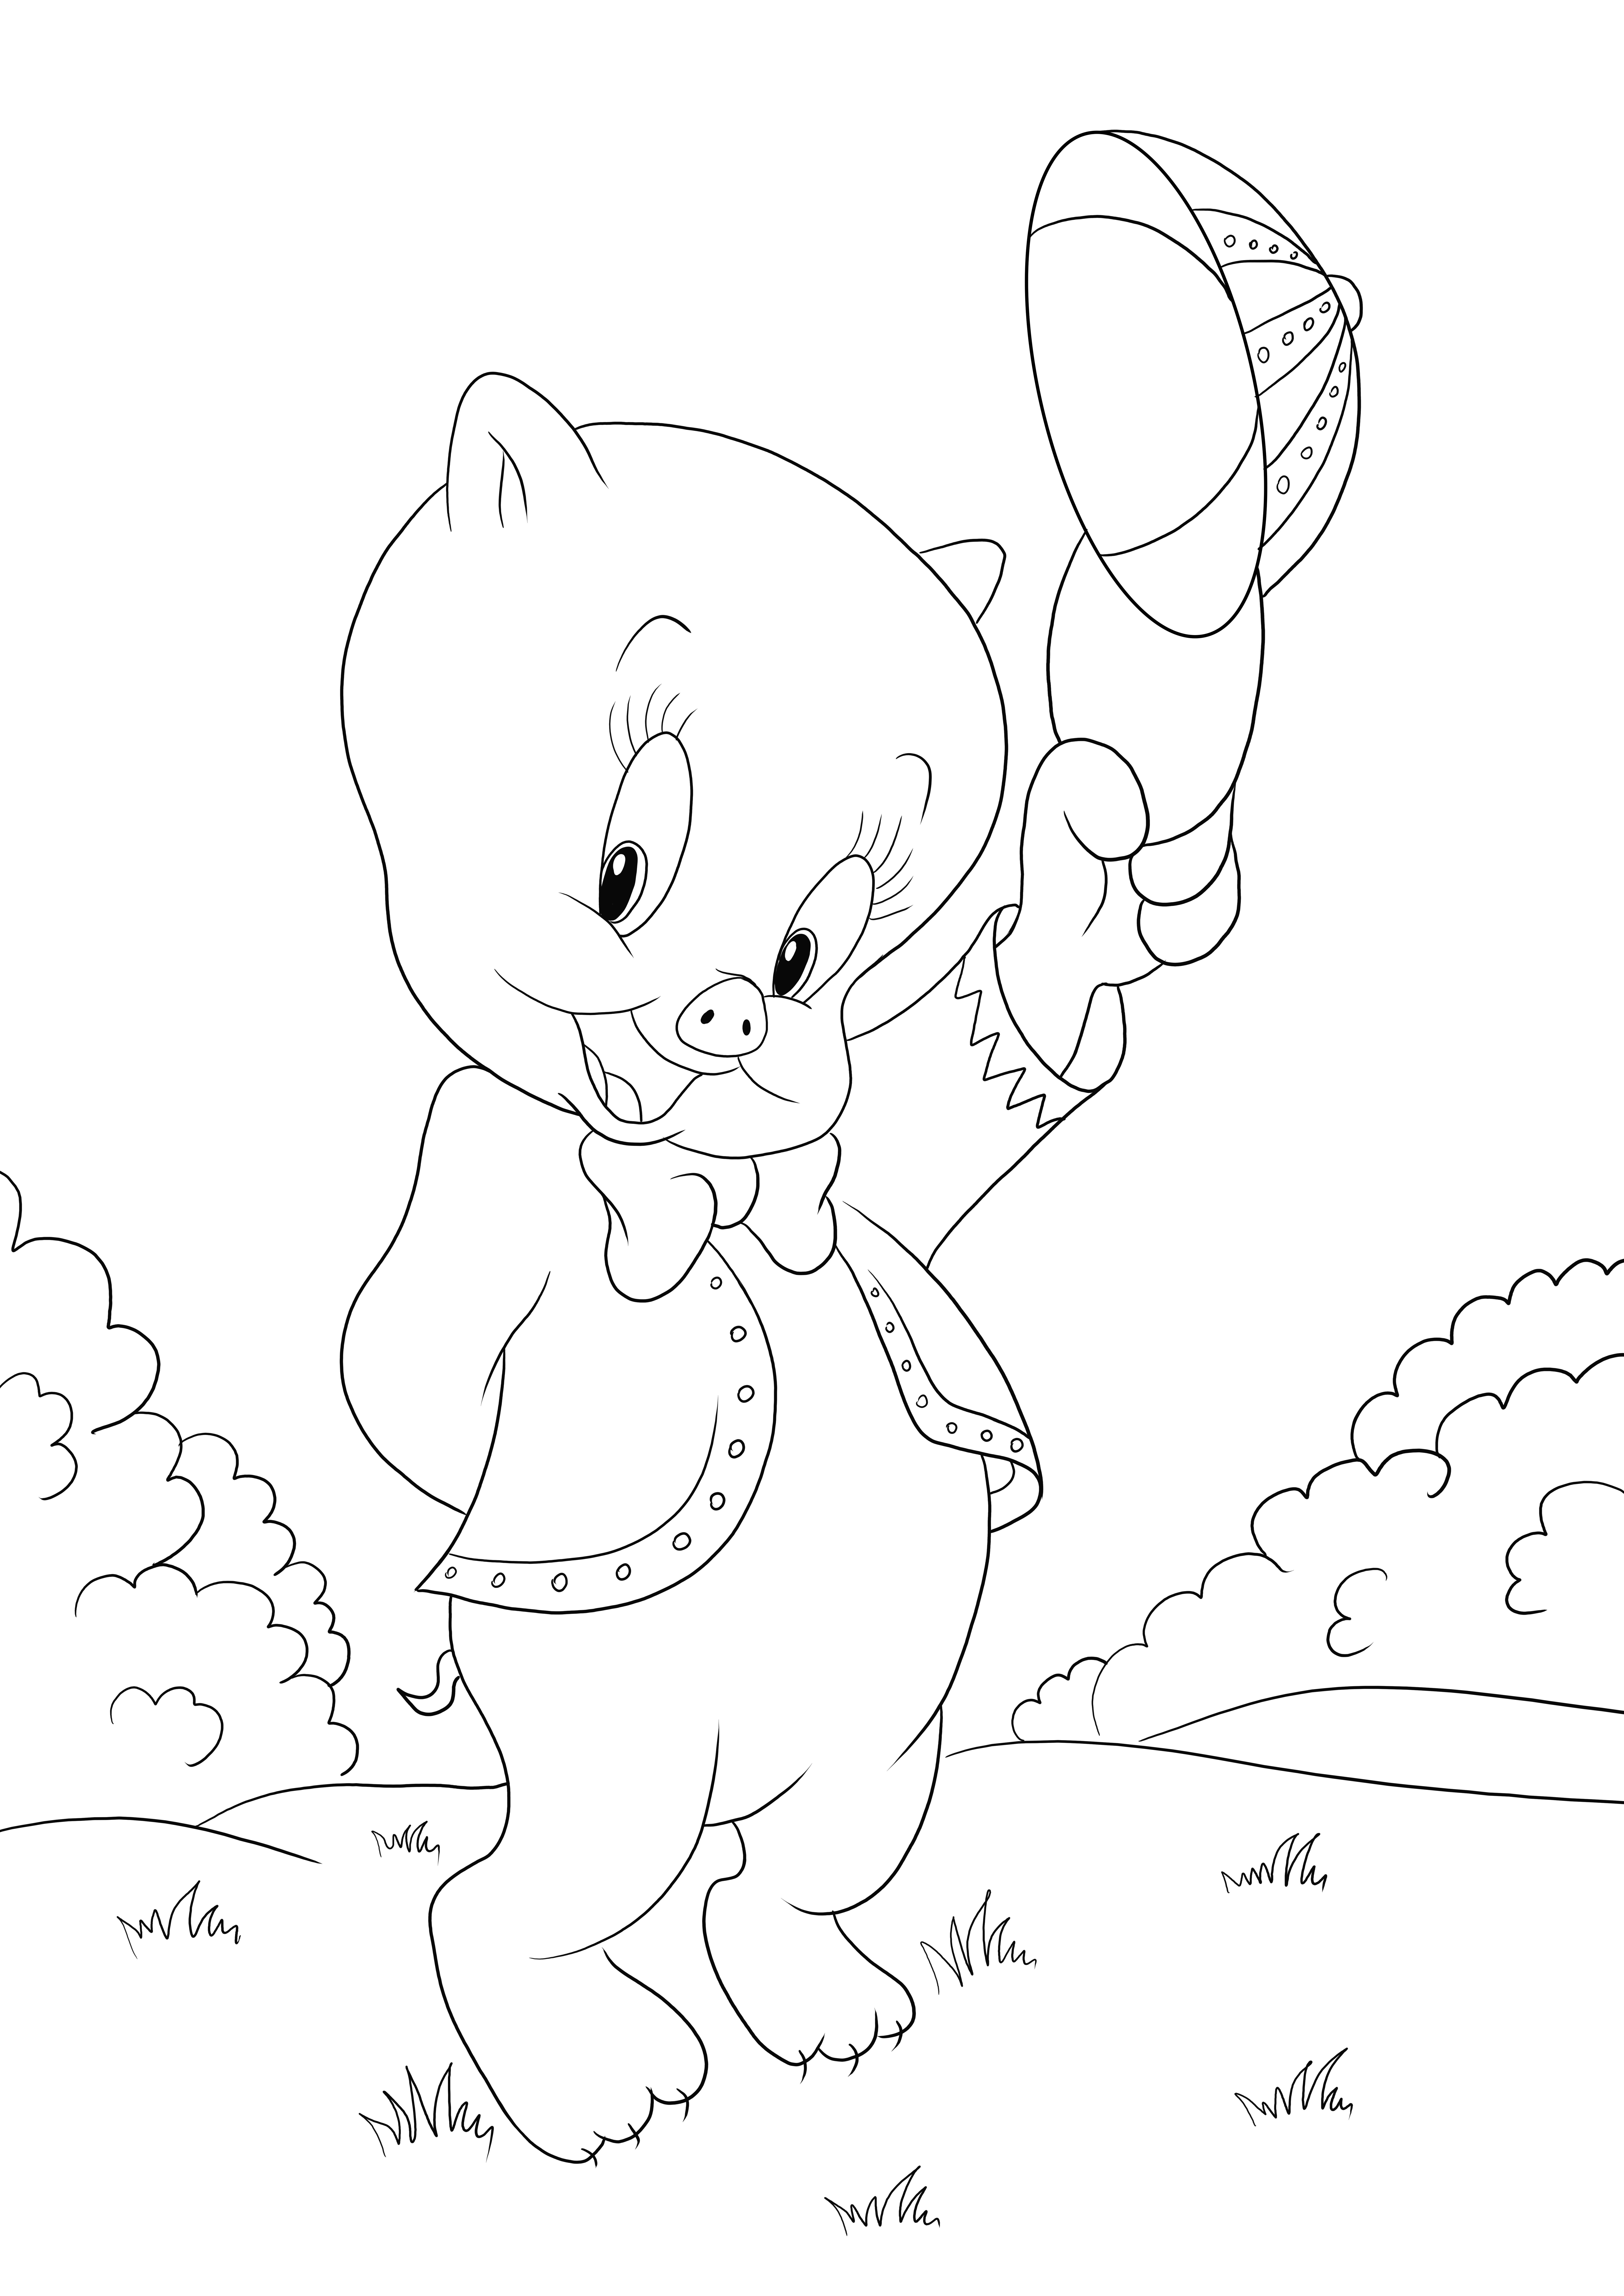 Porky from Looney Tunes simple coloring sheet free to print